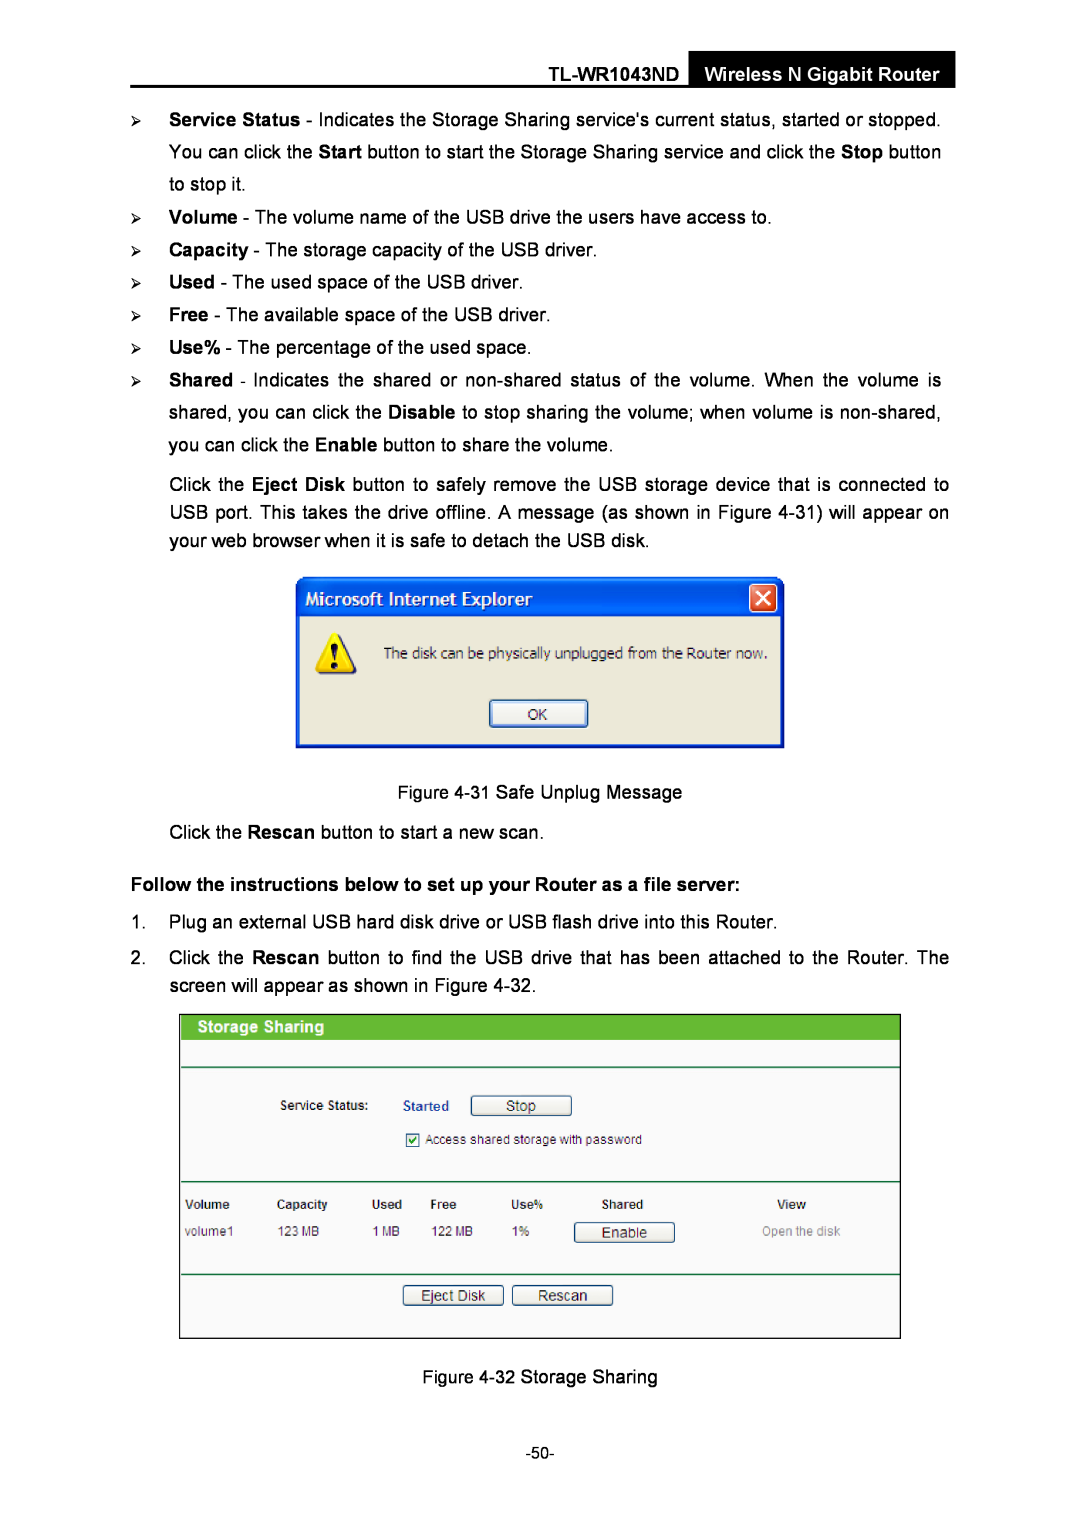 TP-Link TL-WR1043ND manual Follow the instructions below to set up your Router as a file server 